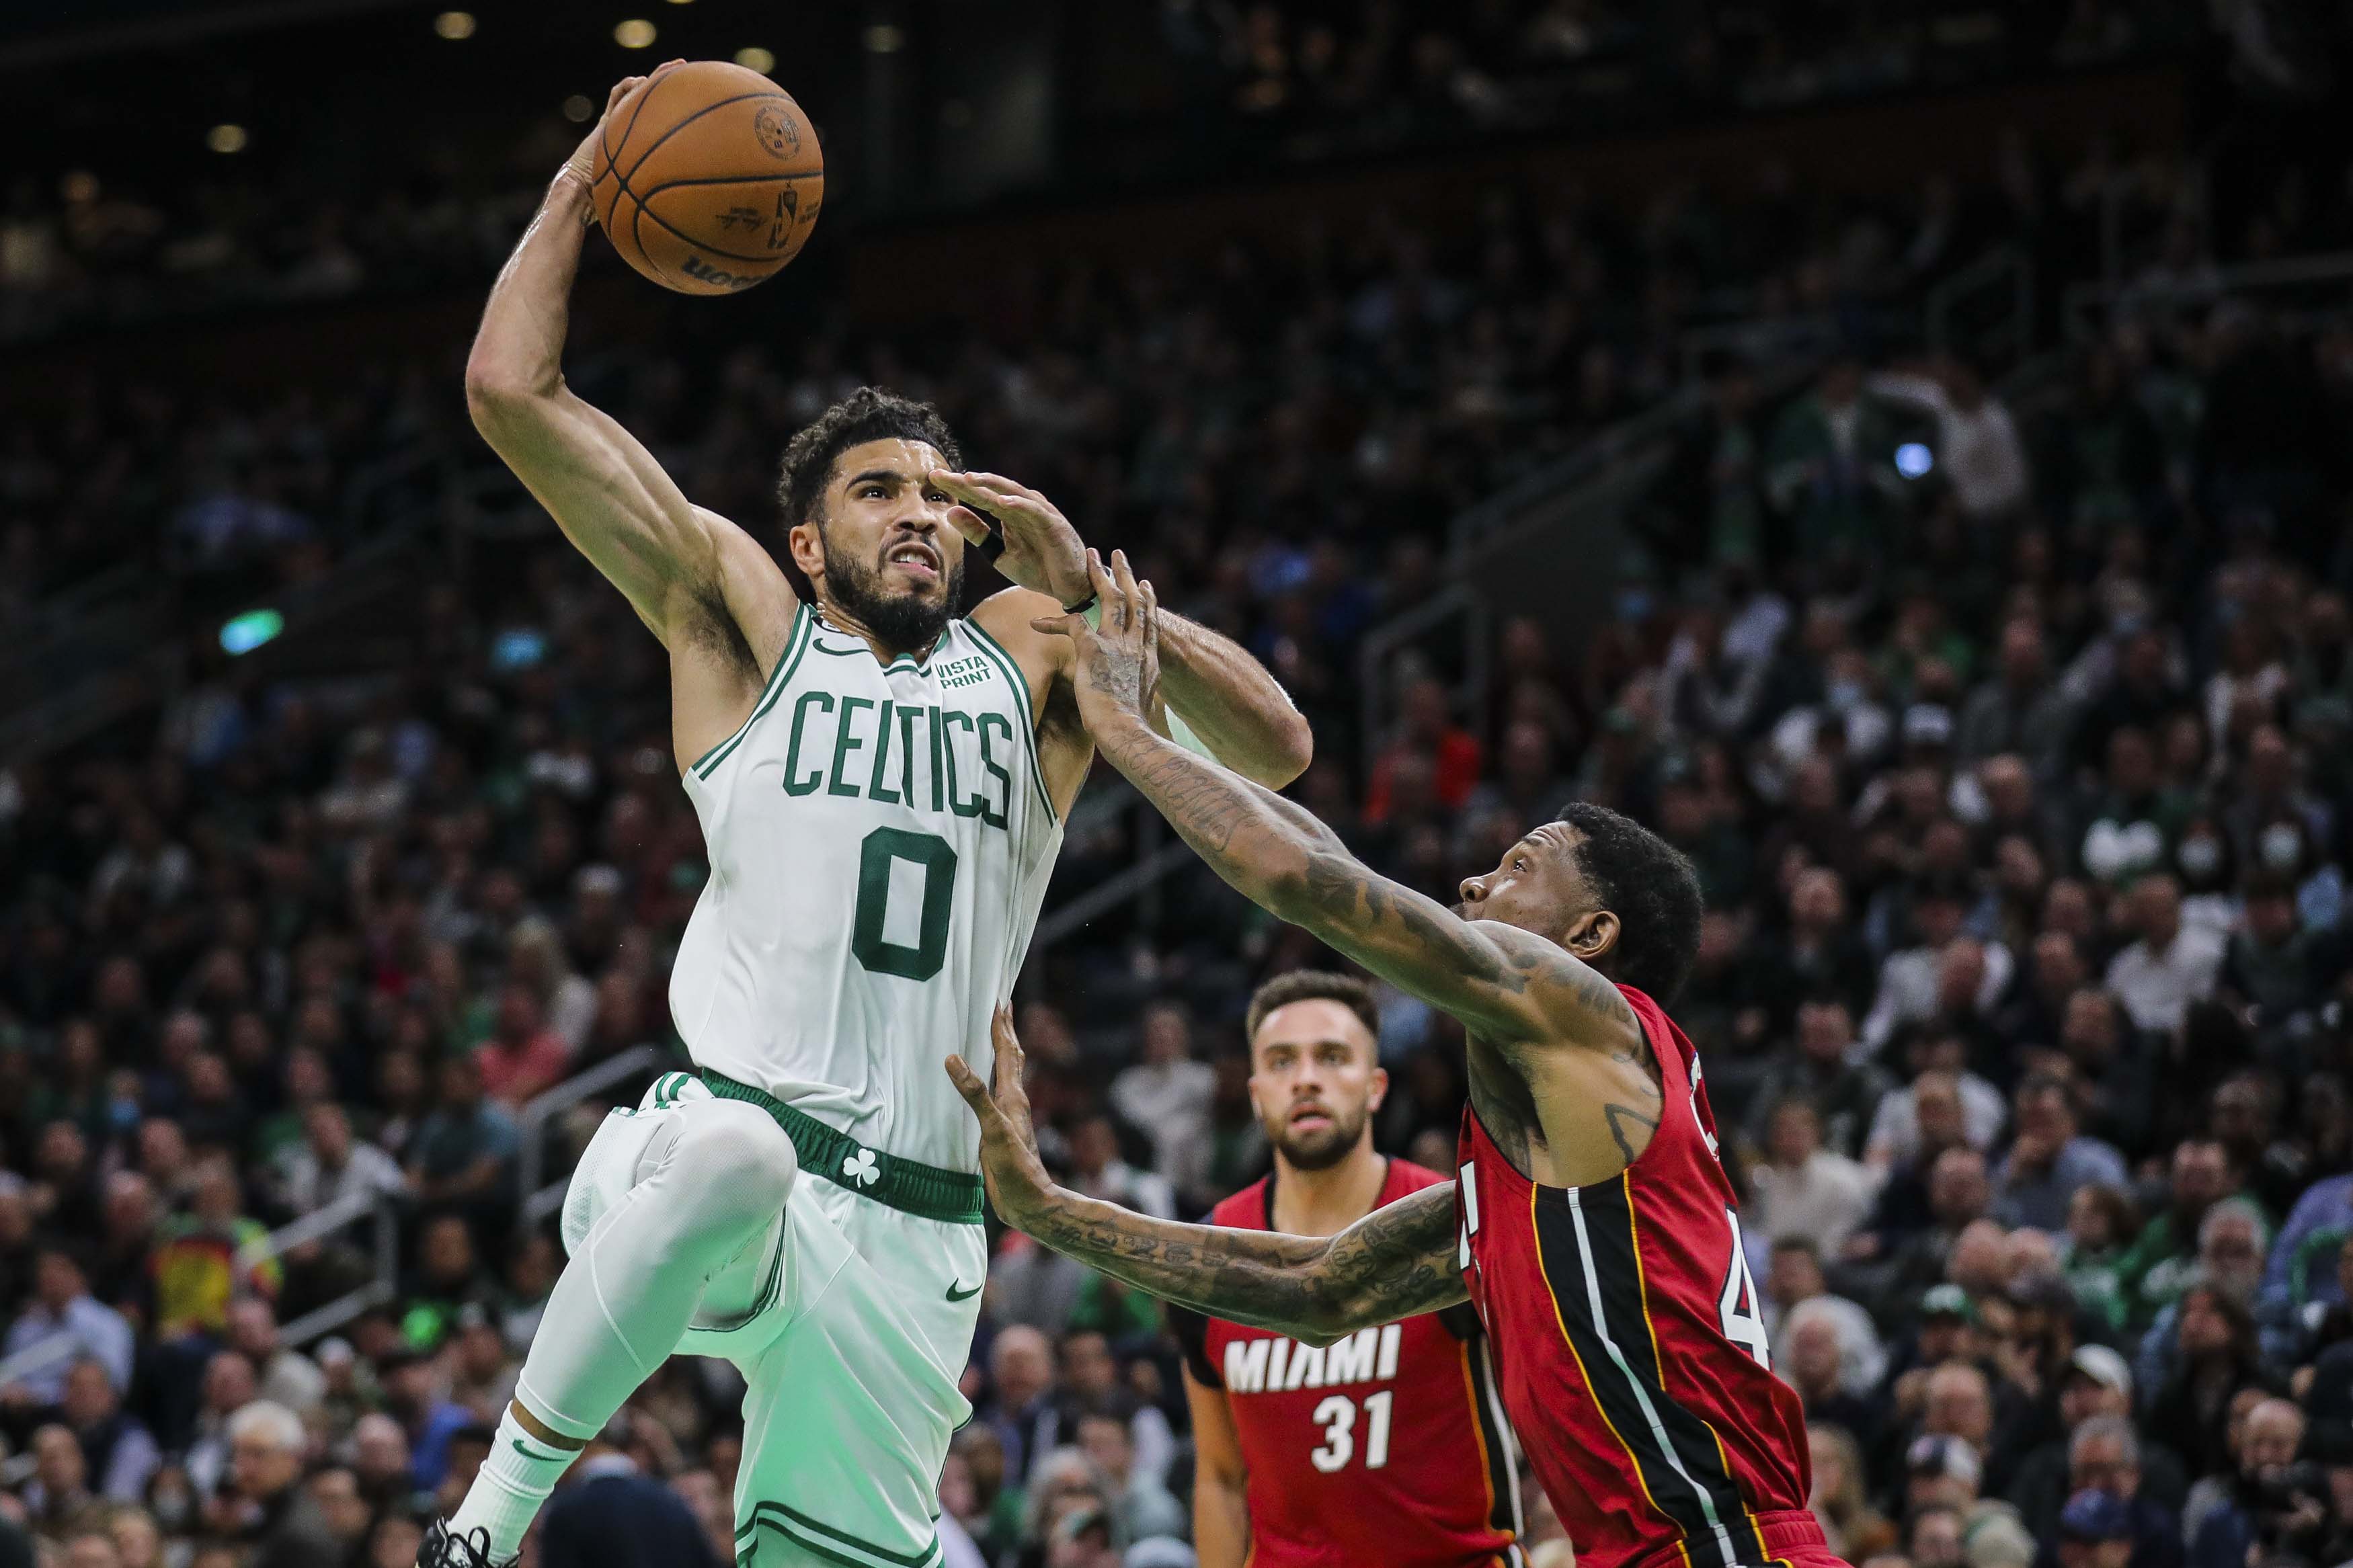 Report: Jayson Tatum agrees to five-year contract extension with Boston  Celtics worth up to $195.6 million - CelticsBlog